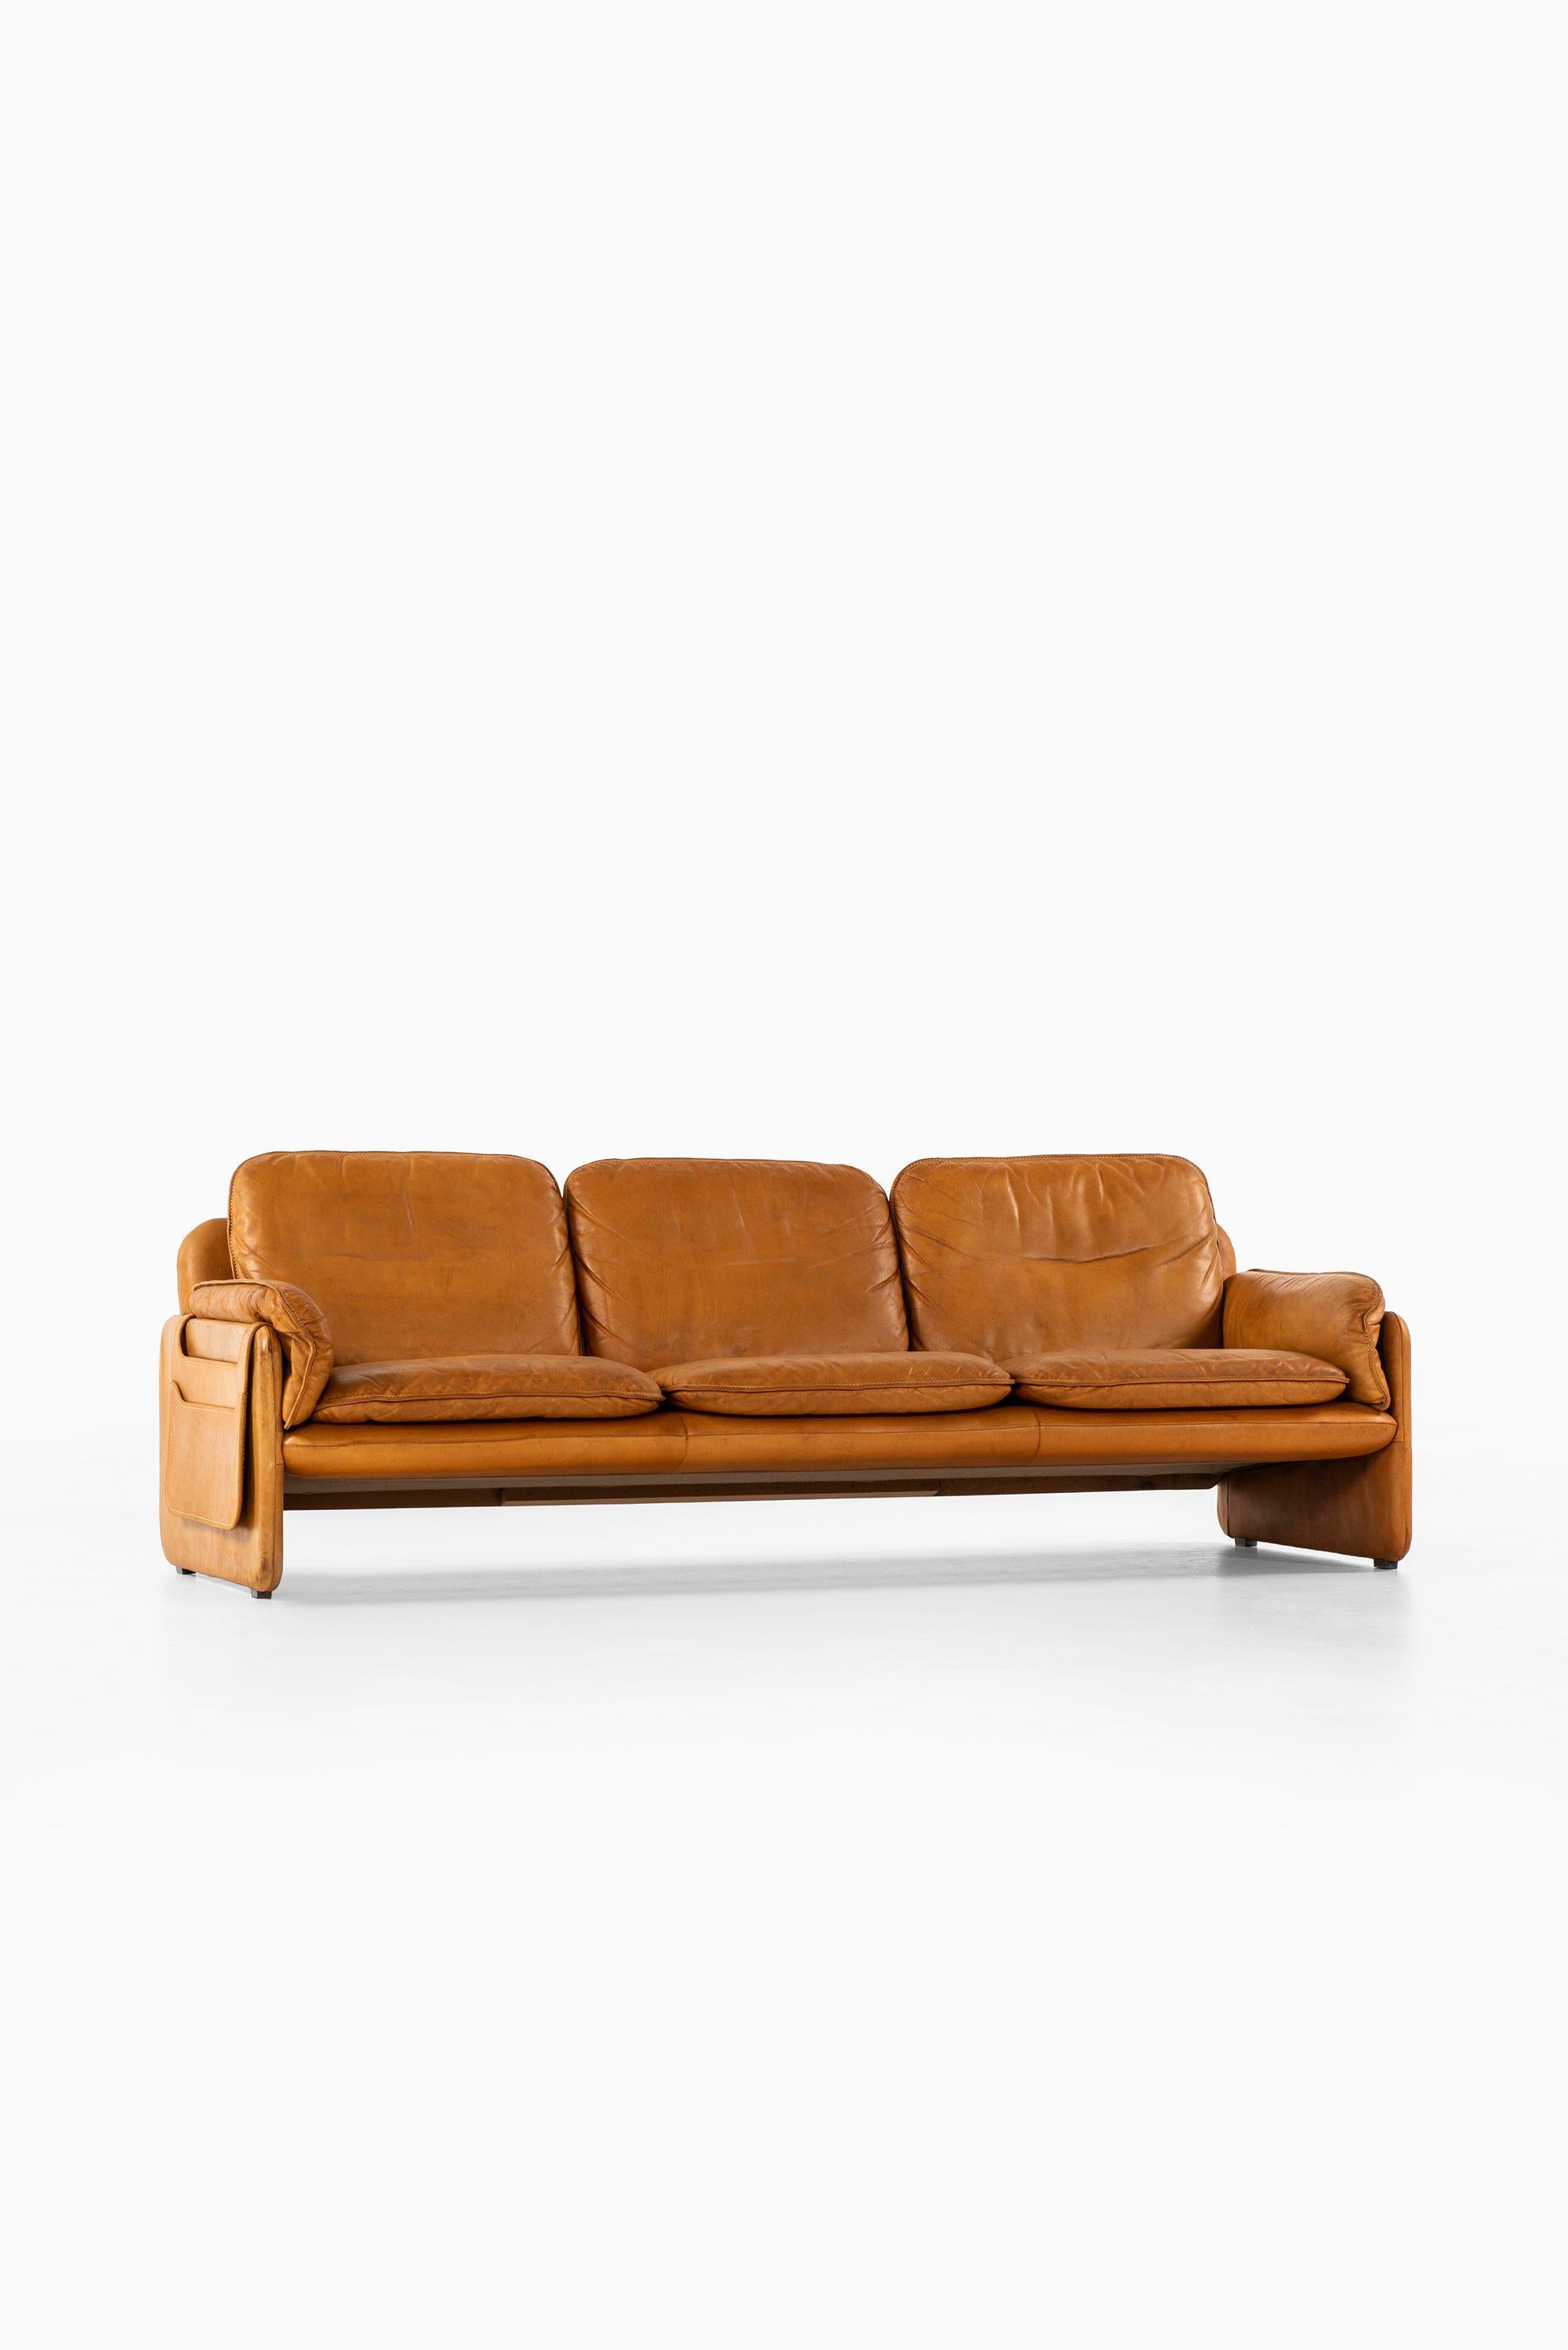 Mid-20th Century Sofa Model DS-61 Produced by De Sede in Switzerland For Sale